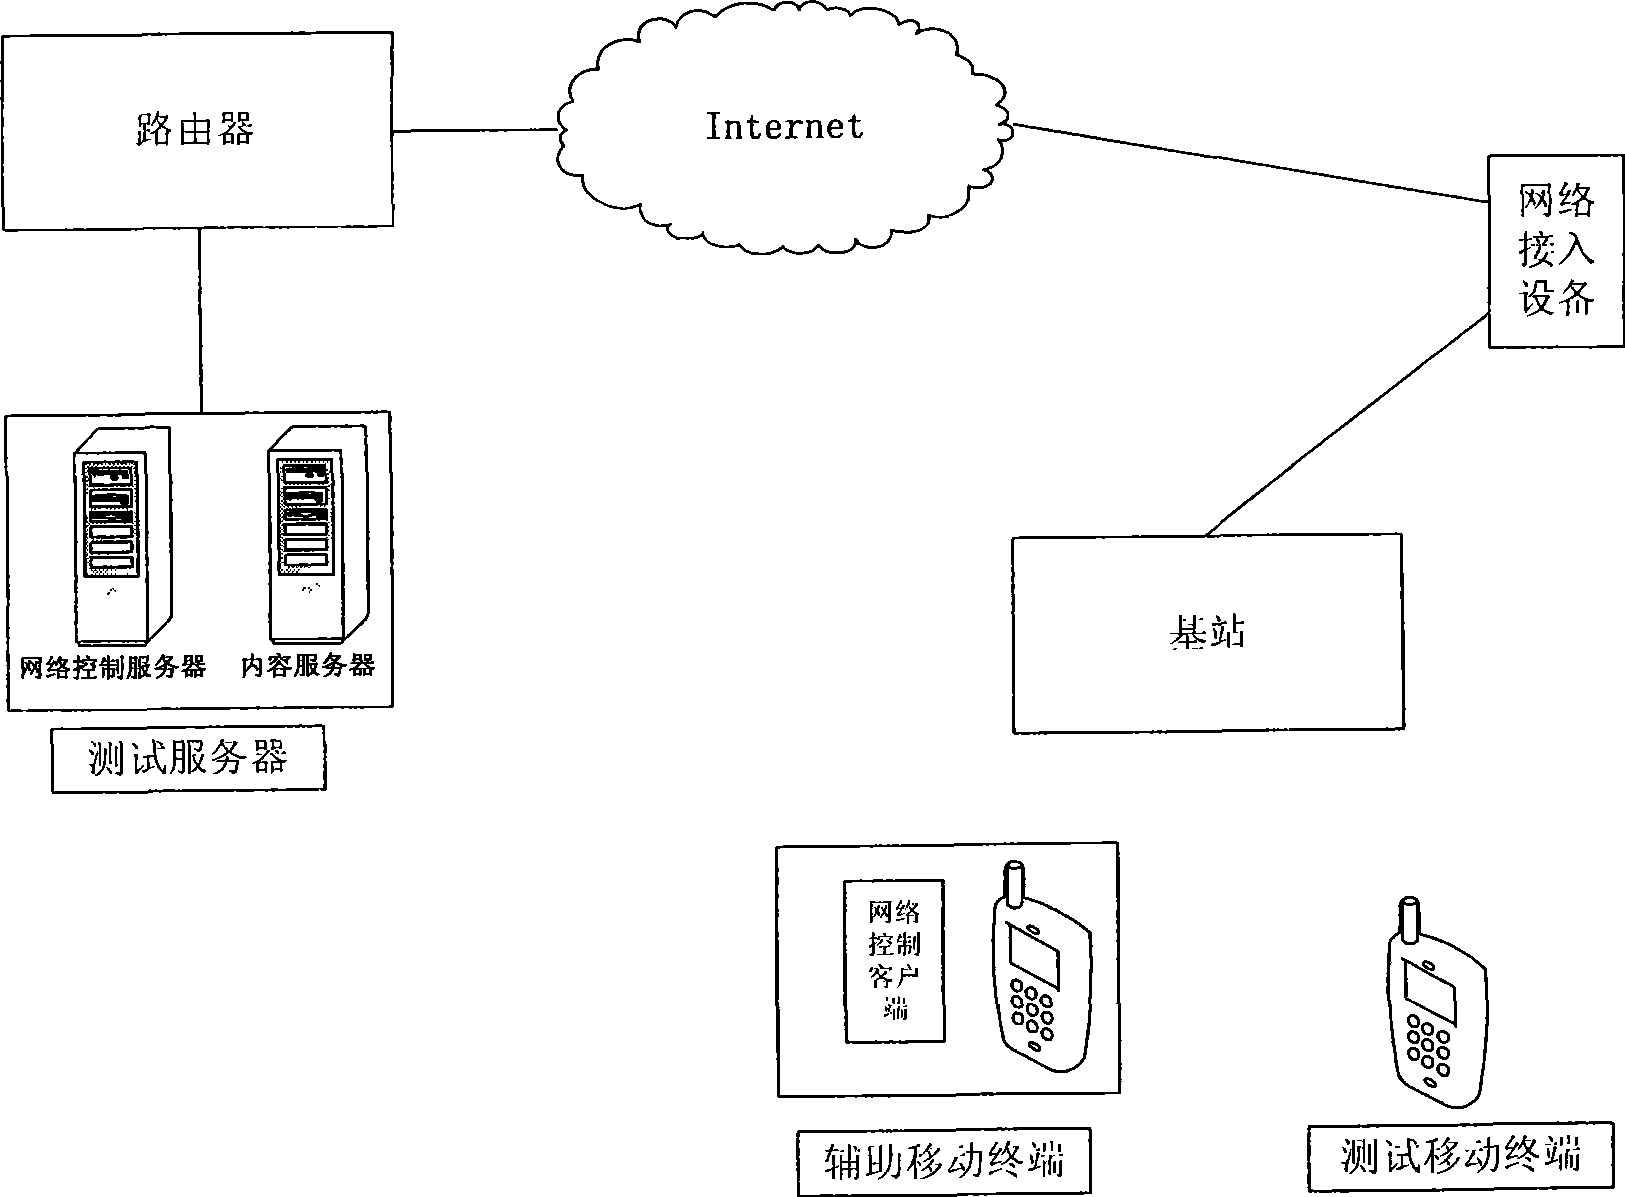 Automatic test system and test method for mobile phone short message